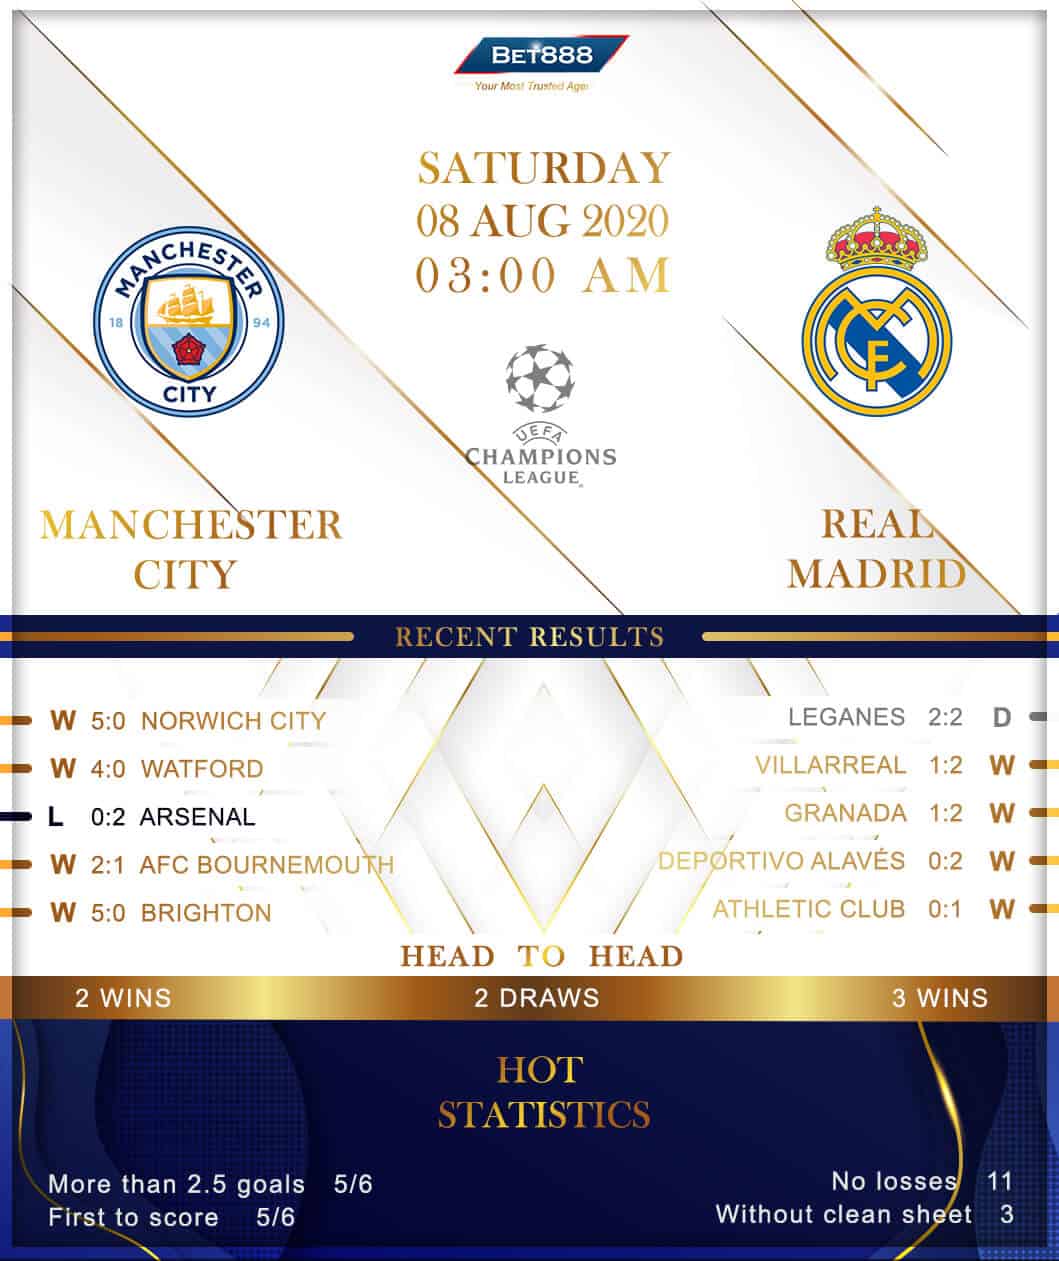 Real Madrid vs Manchester City 08/08/20